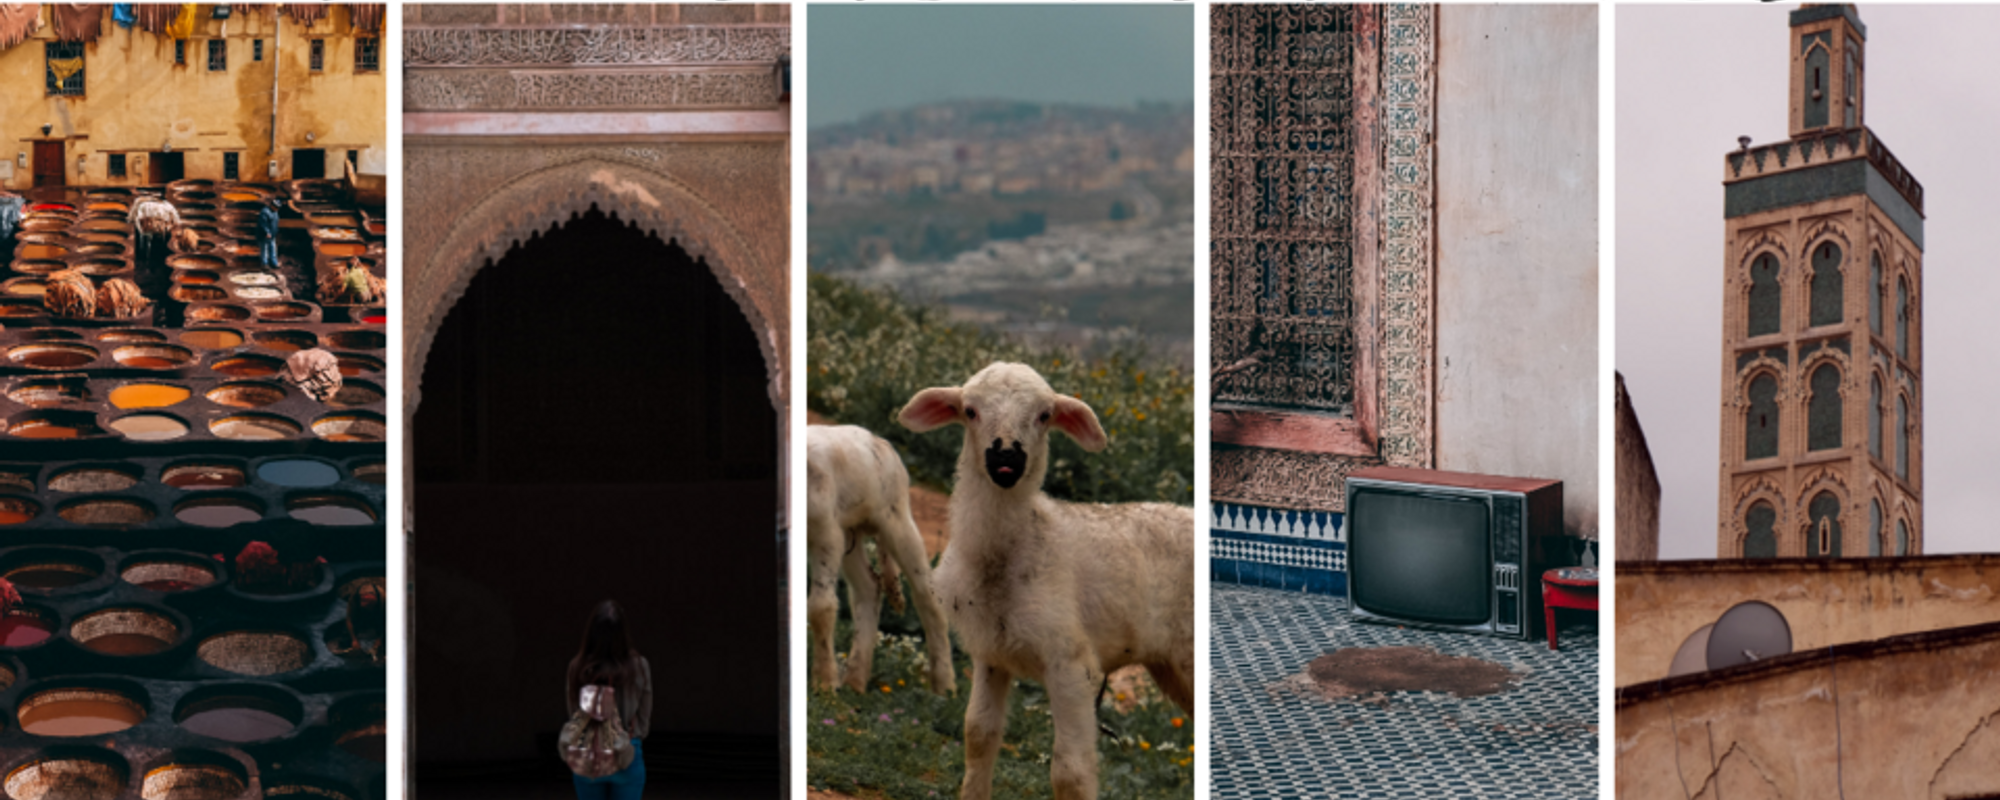 5 places to visit in Fez, Morocco